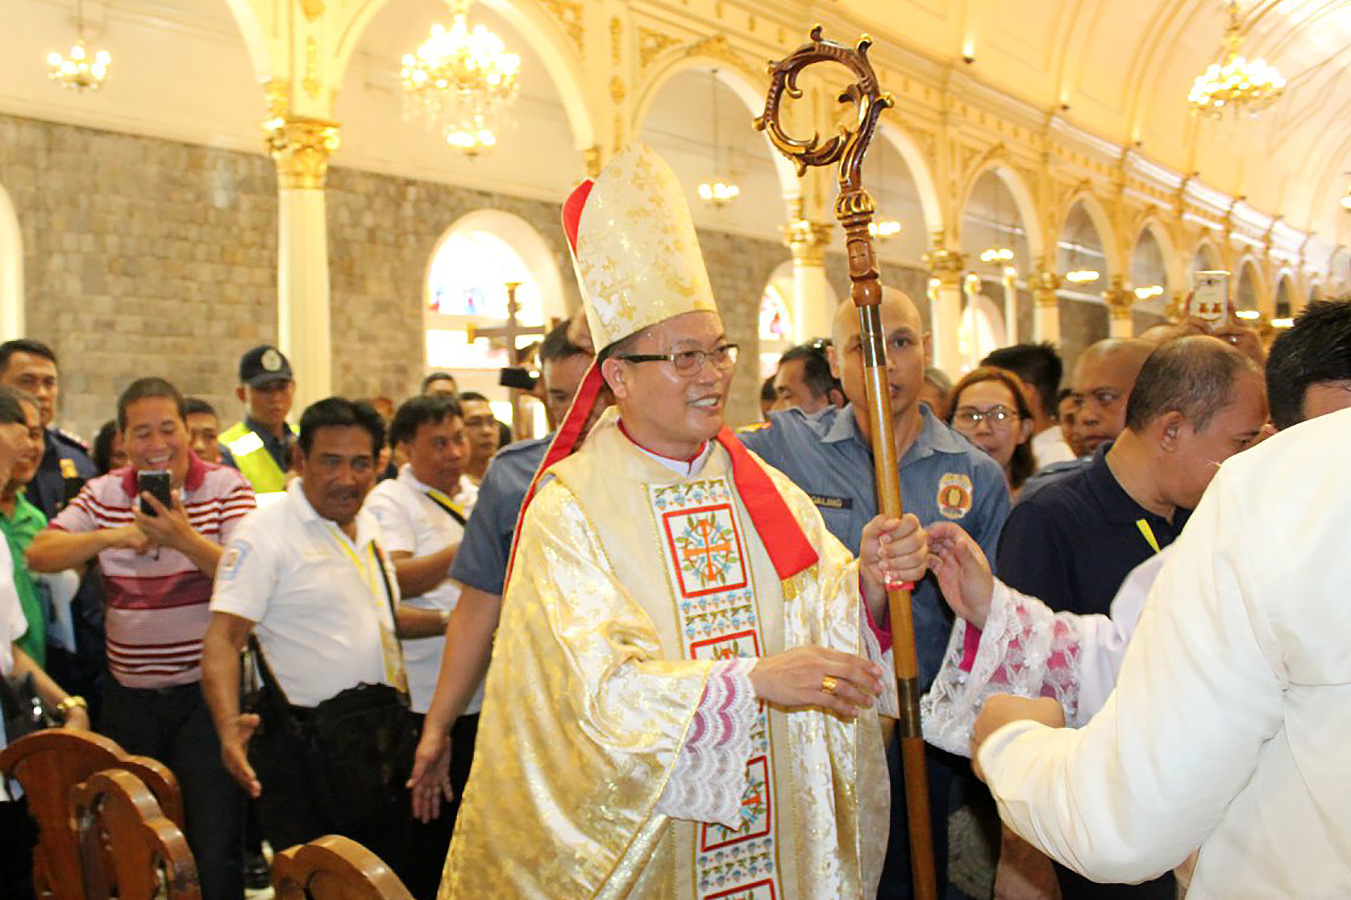 Bishop Louie Galbines of Kabankalan is greeted by crowd after his episcopal ordination at the San Sebastian Cathedral in Bacolod City on May 28. PHOTO FROM BACOLOD PNP FACEBOOK PAGE